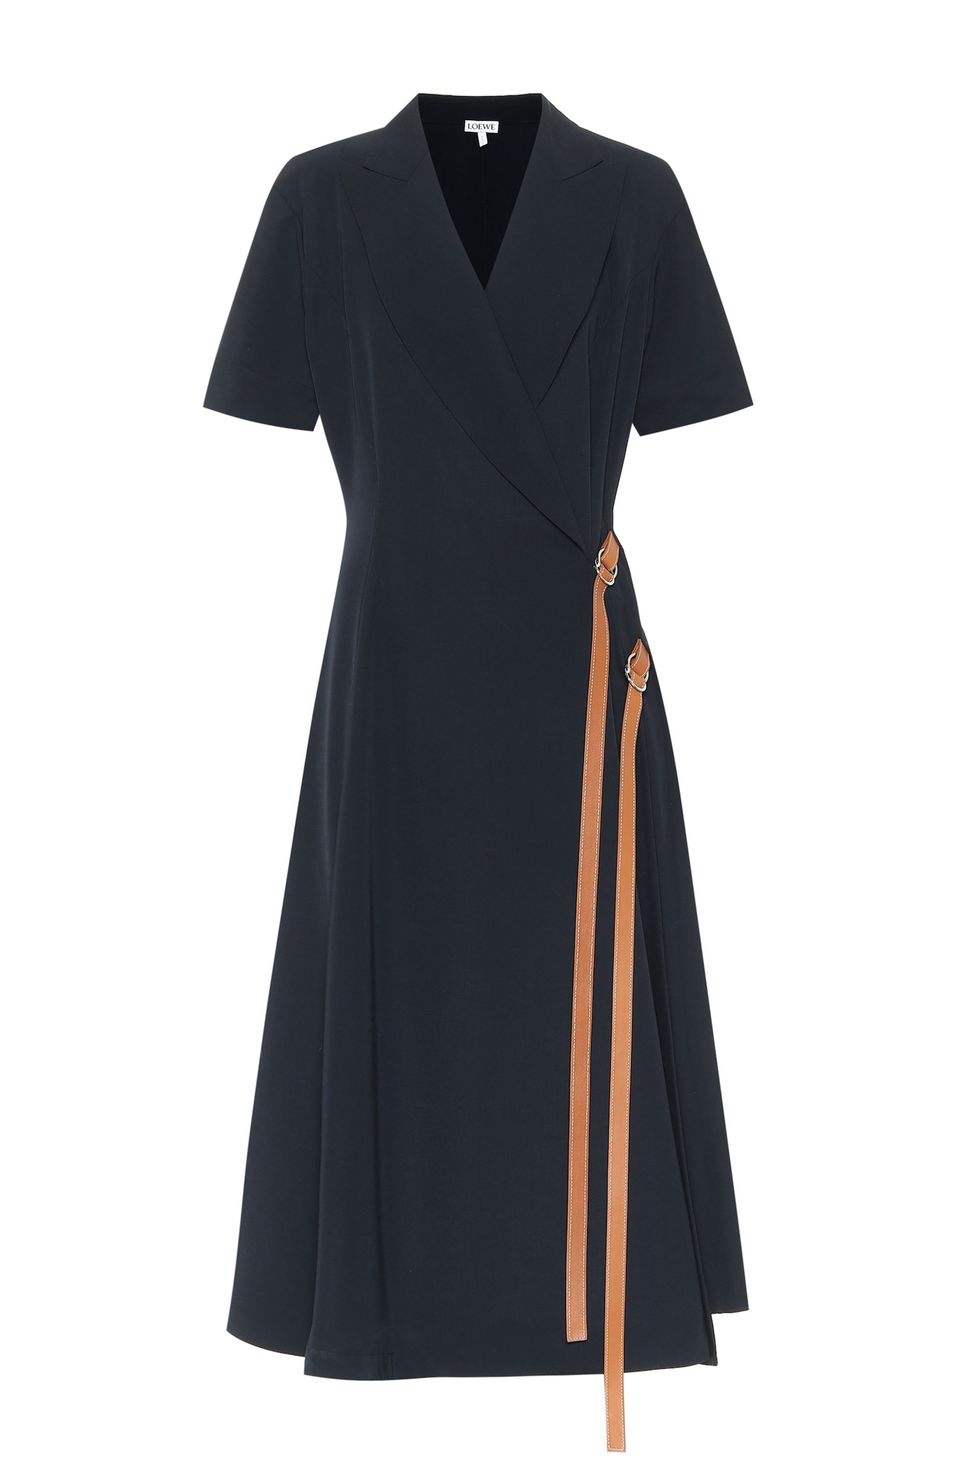 Best wrap dresses to buy this summer